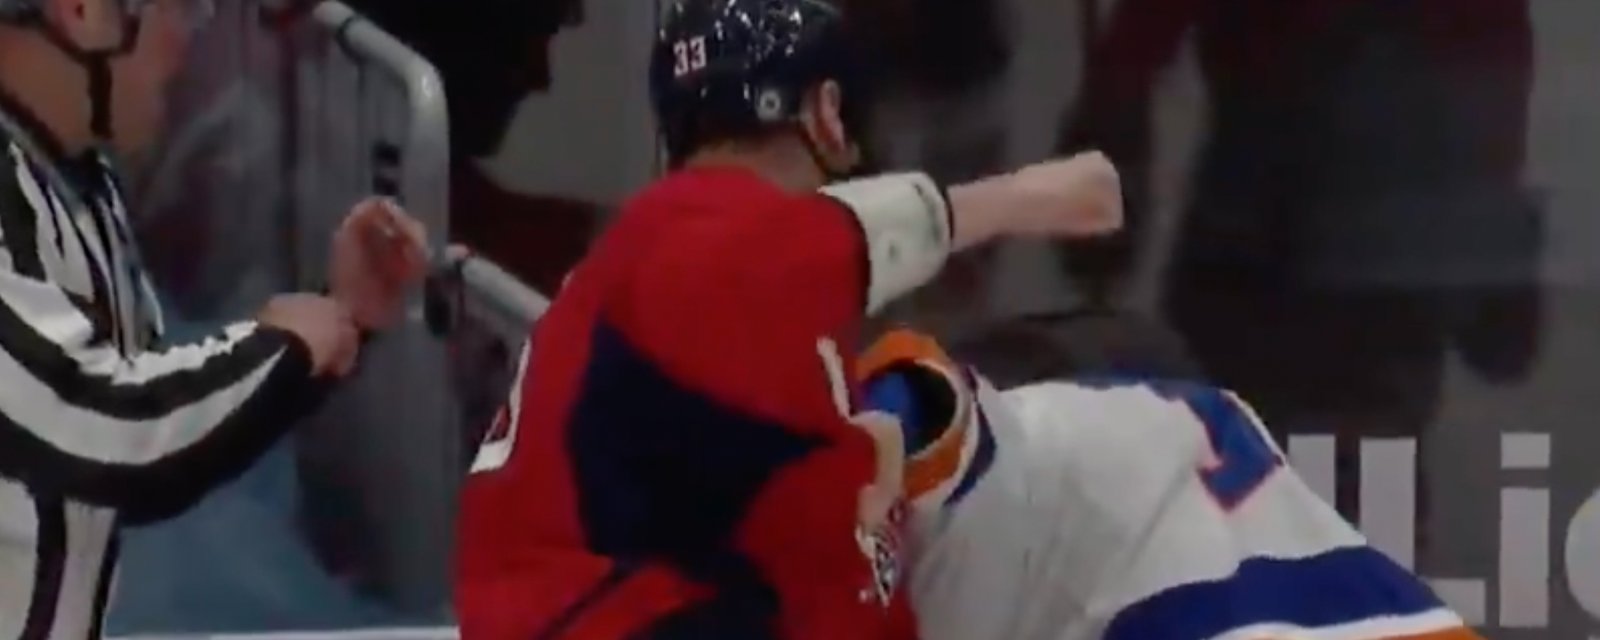 Chara drops Martin again after brutal hit from behind on teammate! 